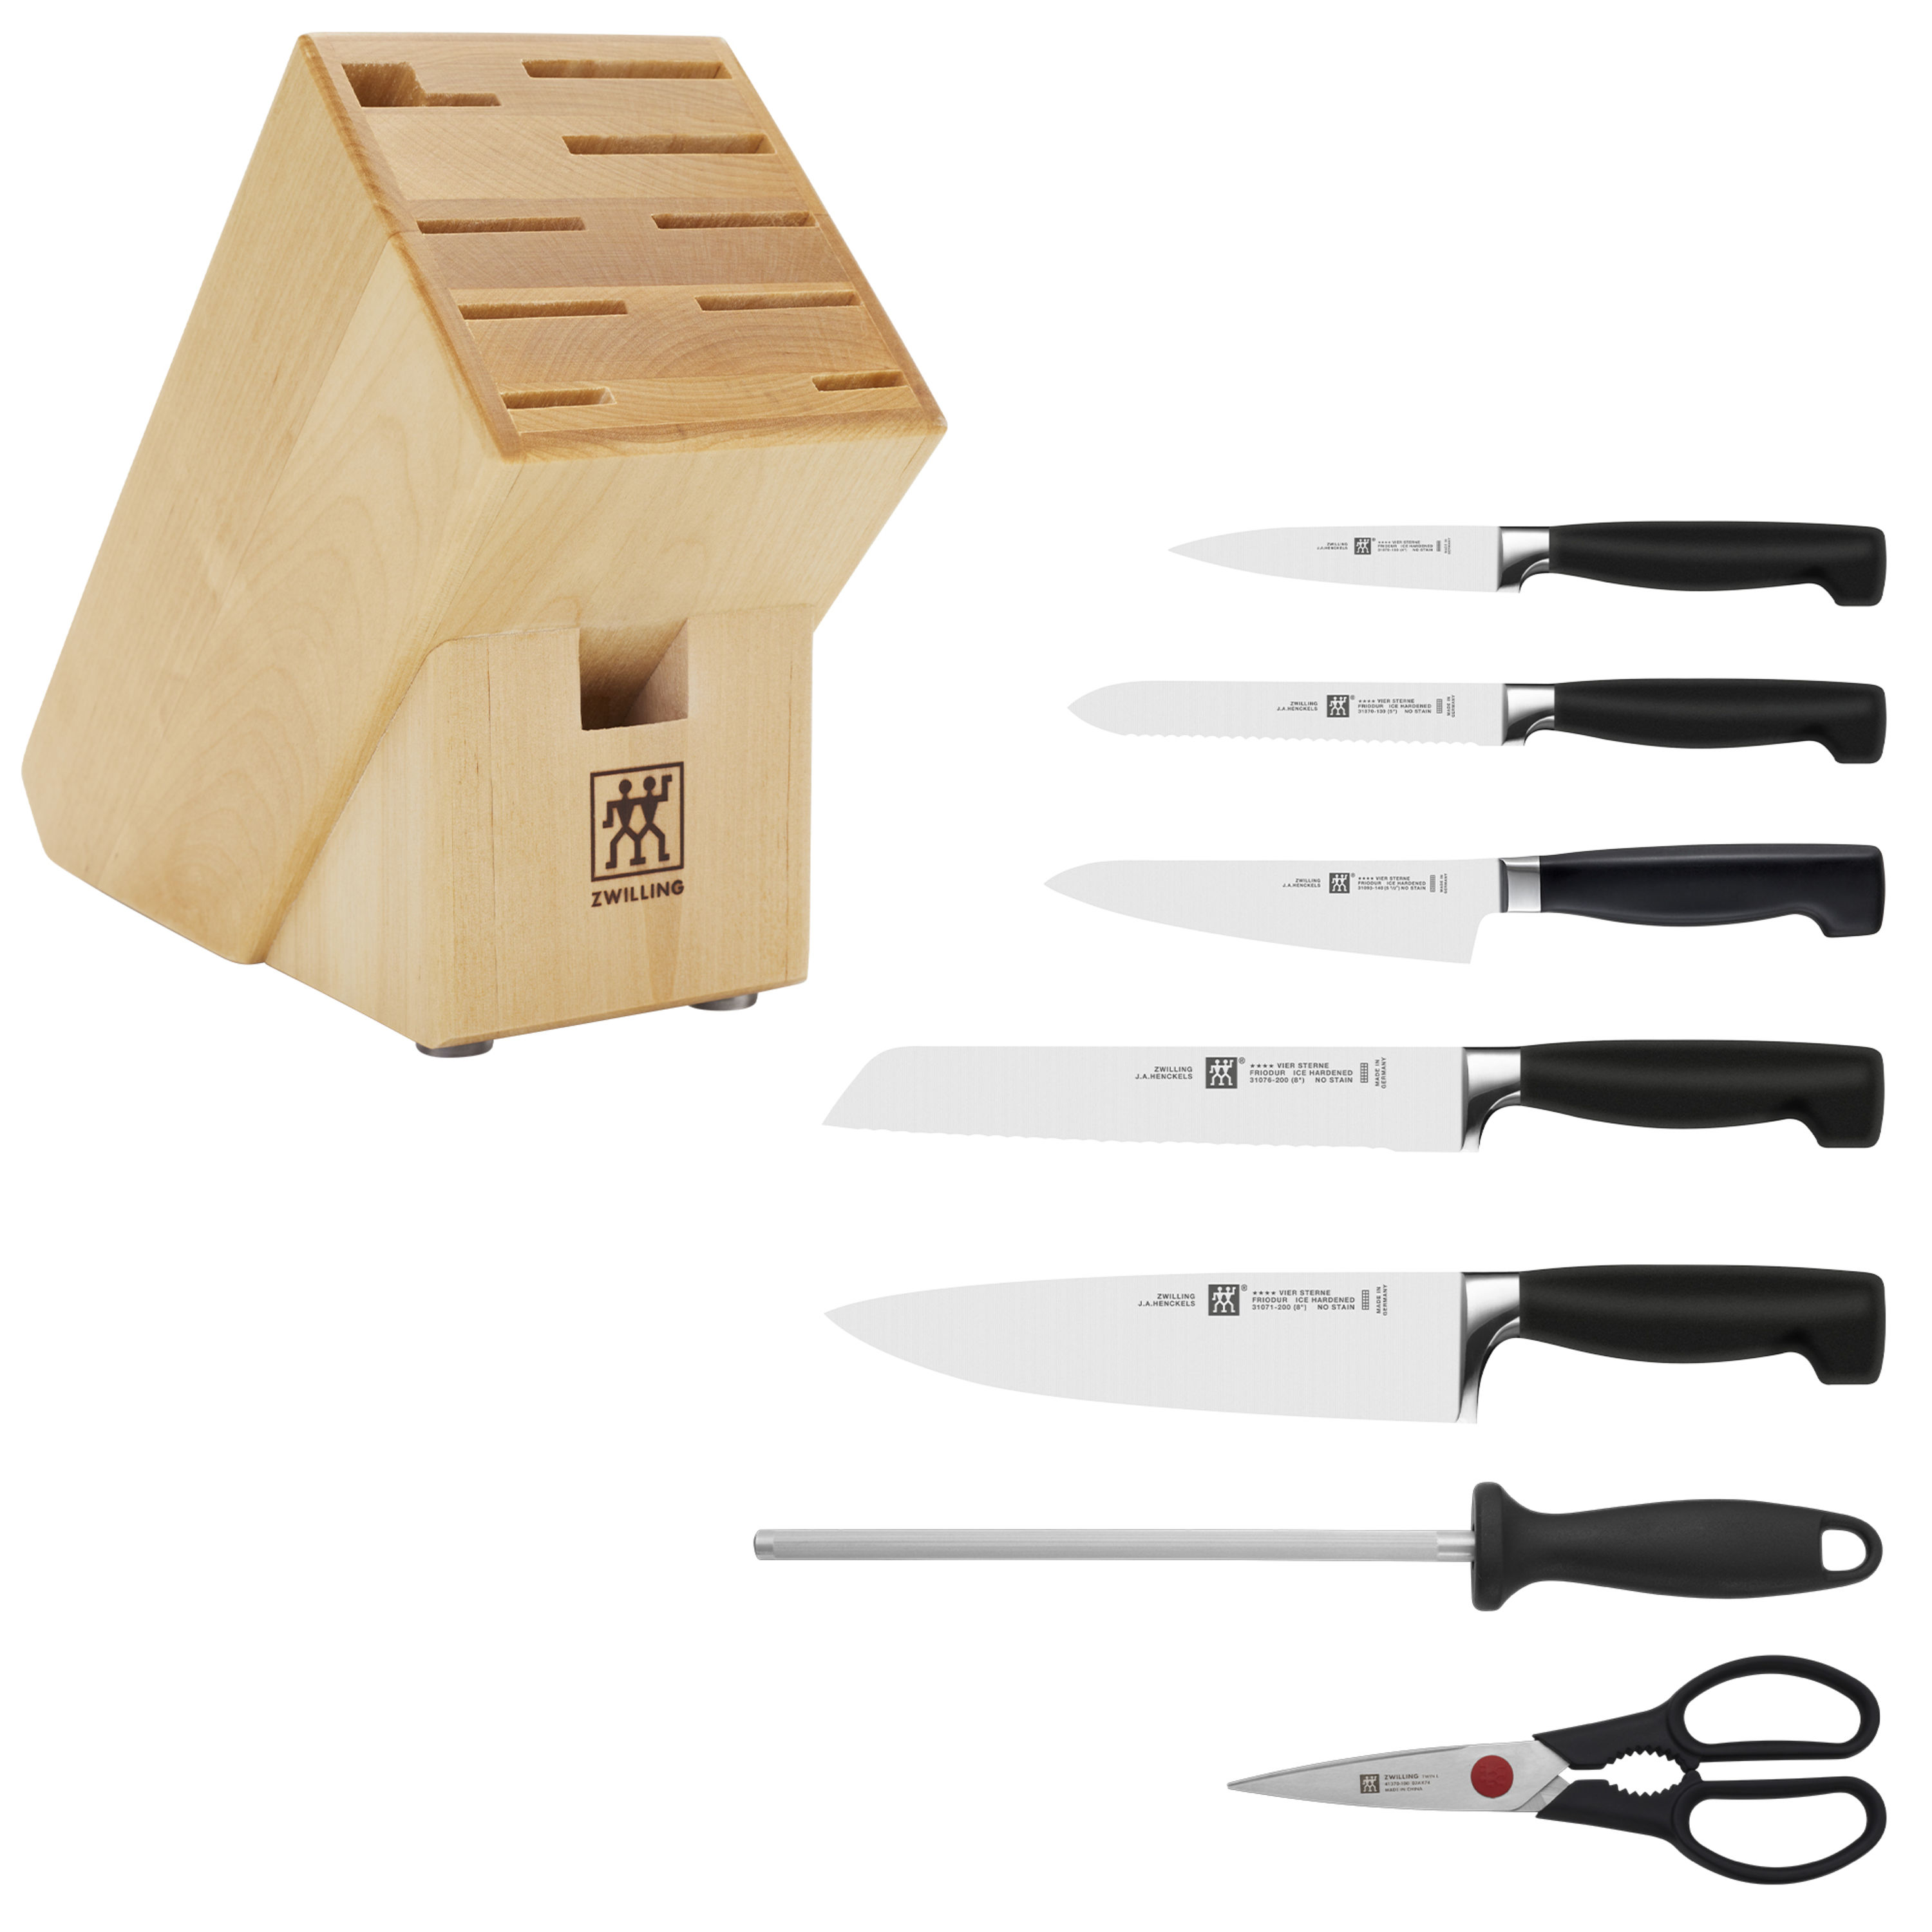 GIVEAWAY!! Zwilling Pro 9-Piece Knife Set ($890 Value